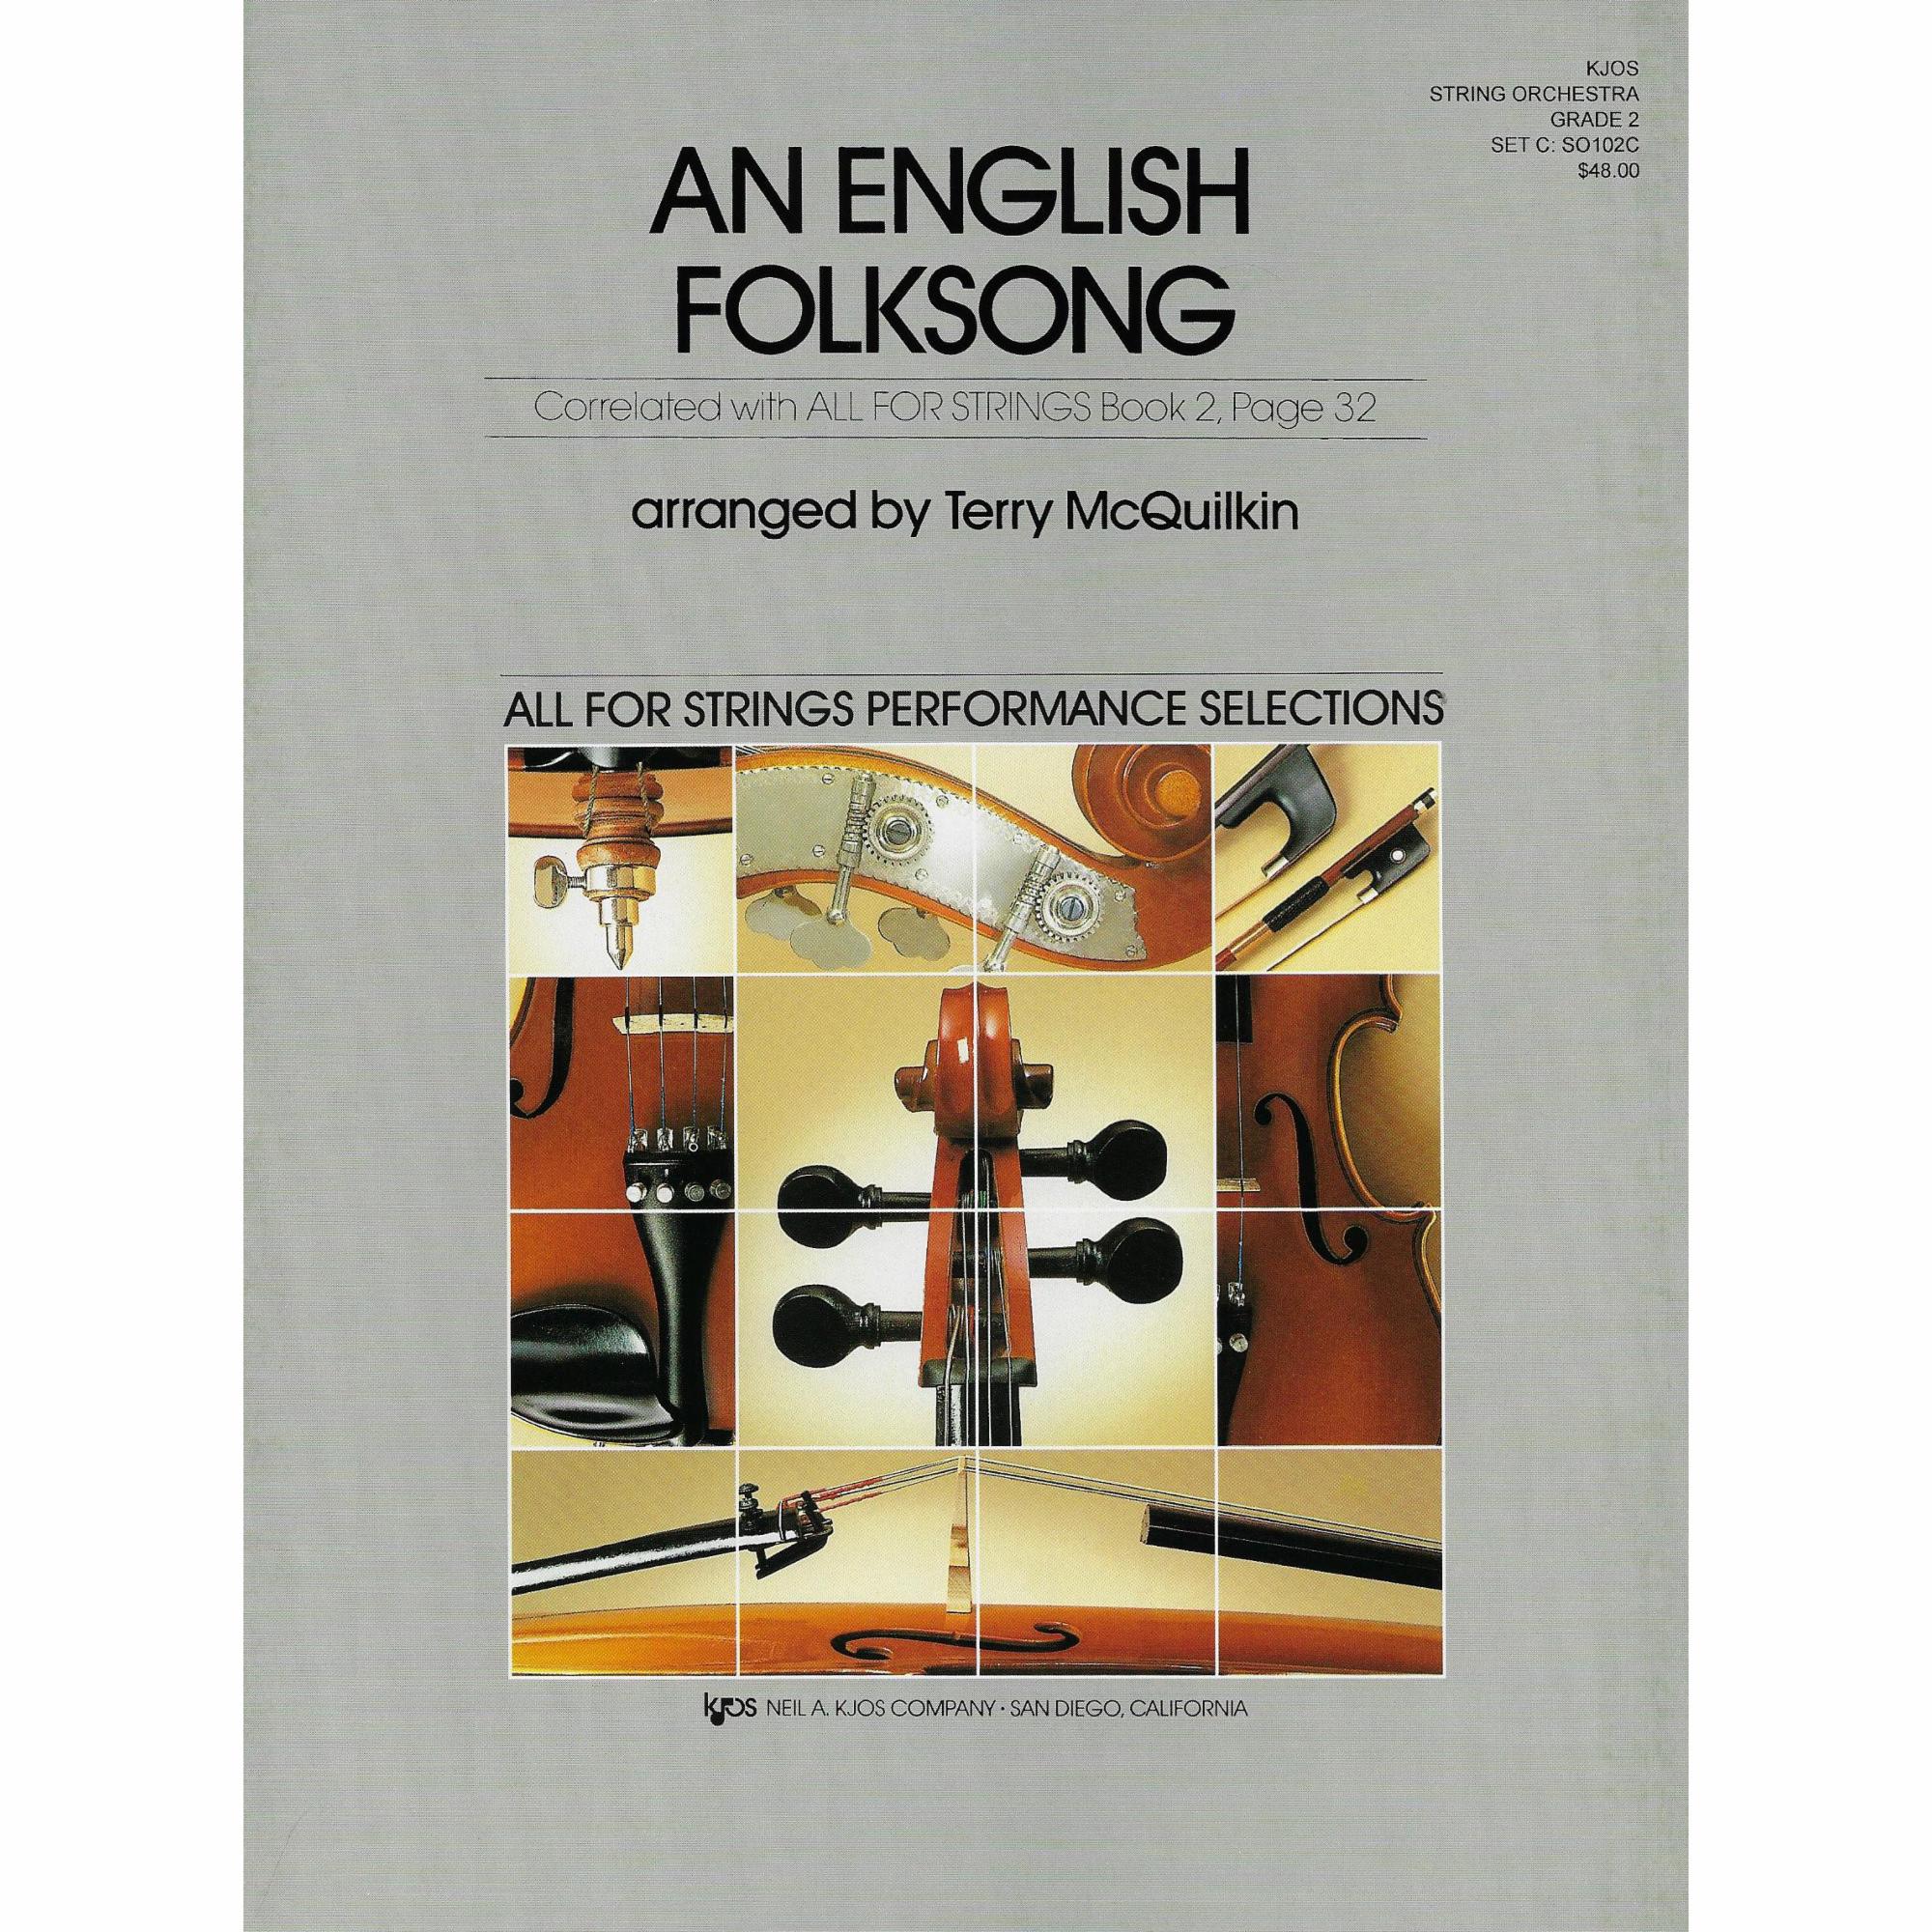 An English Folksong for String Orchestra